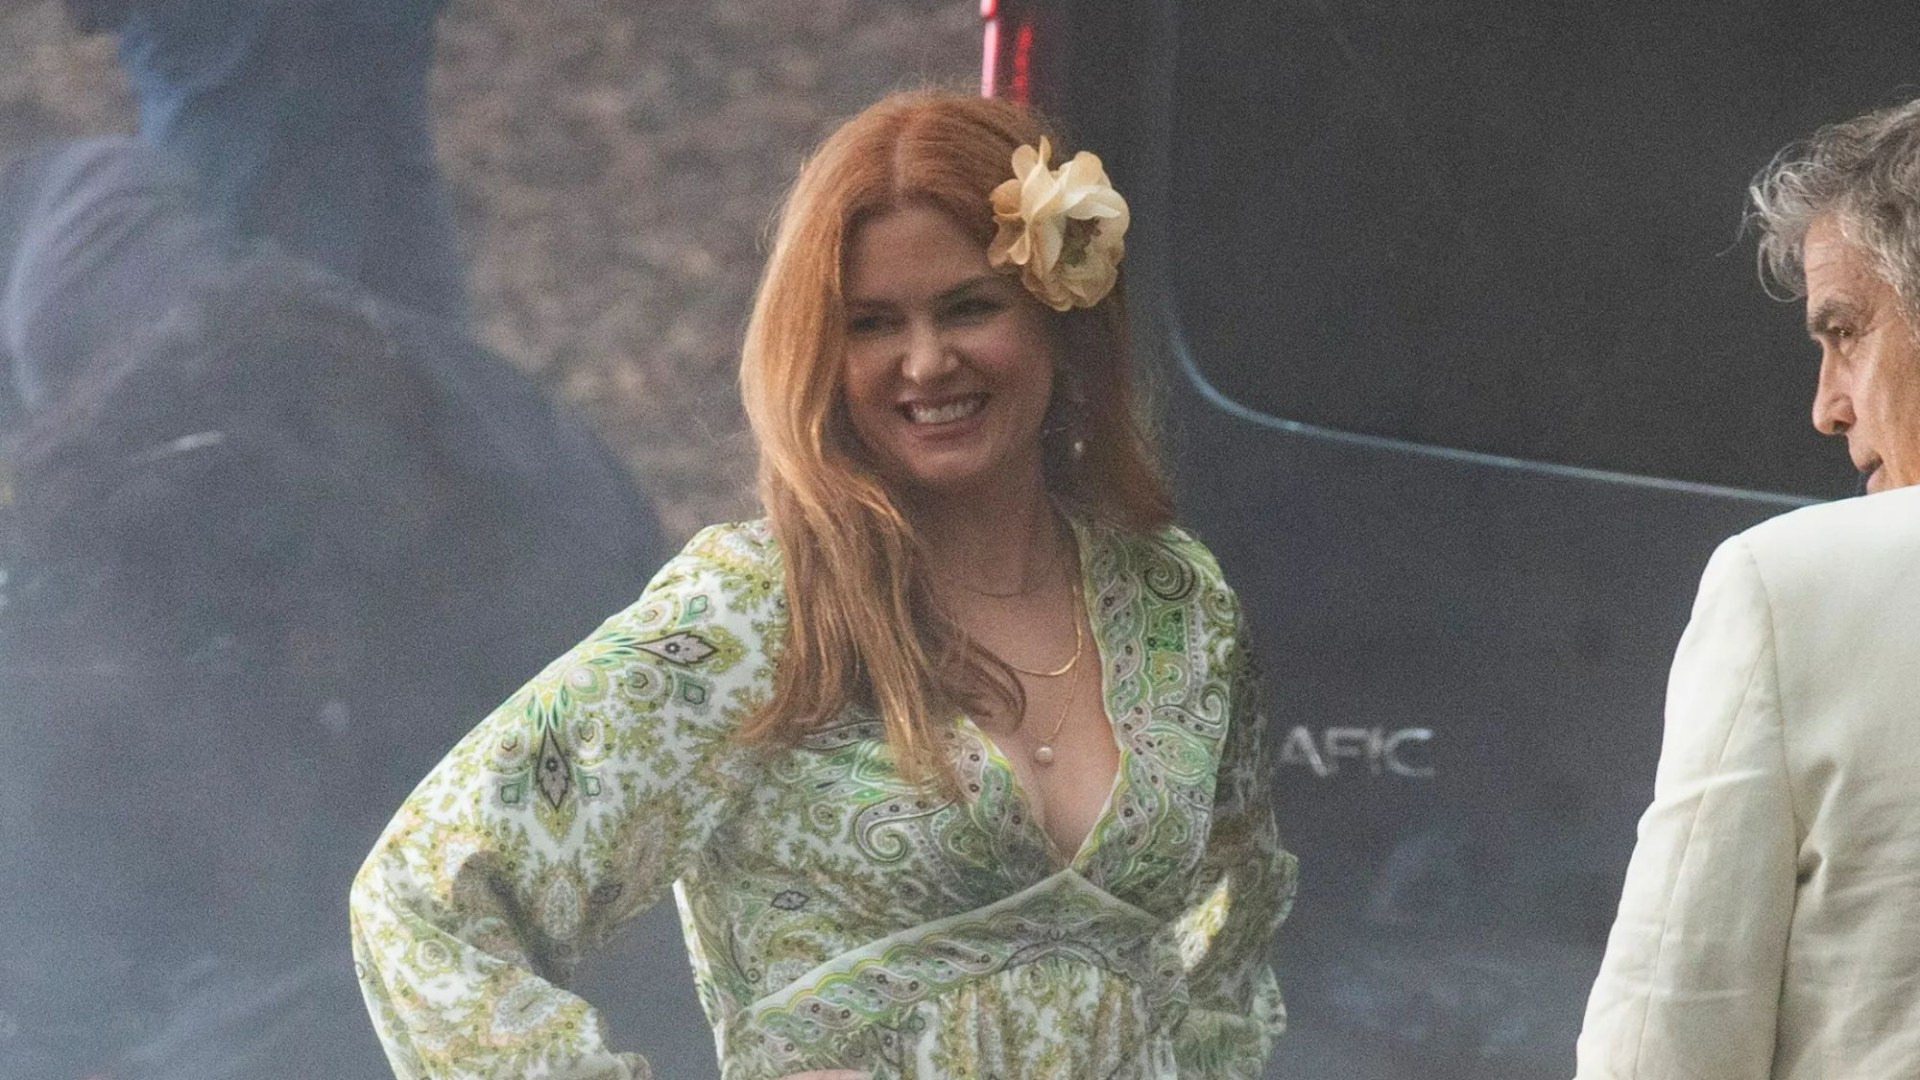 “Isla Fisher beams with joy while locking lips with George Clooney in latest film despite breakup with Sacha Baron Cohen” – Hollywood romance gossip and celebrity news analysis